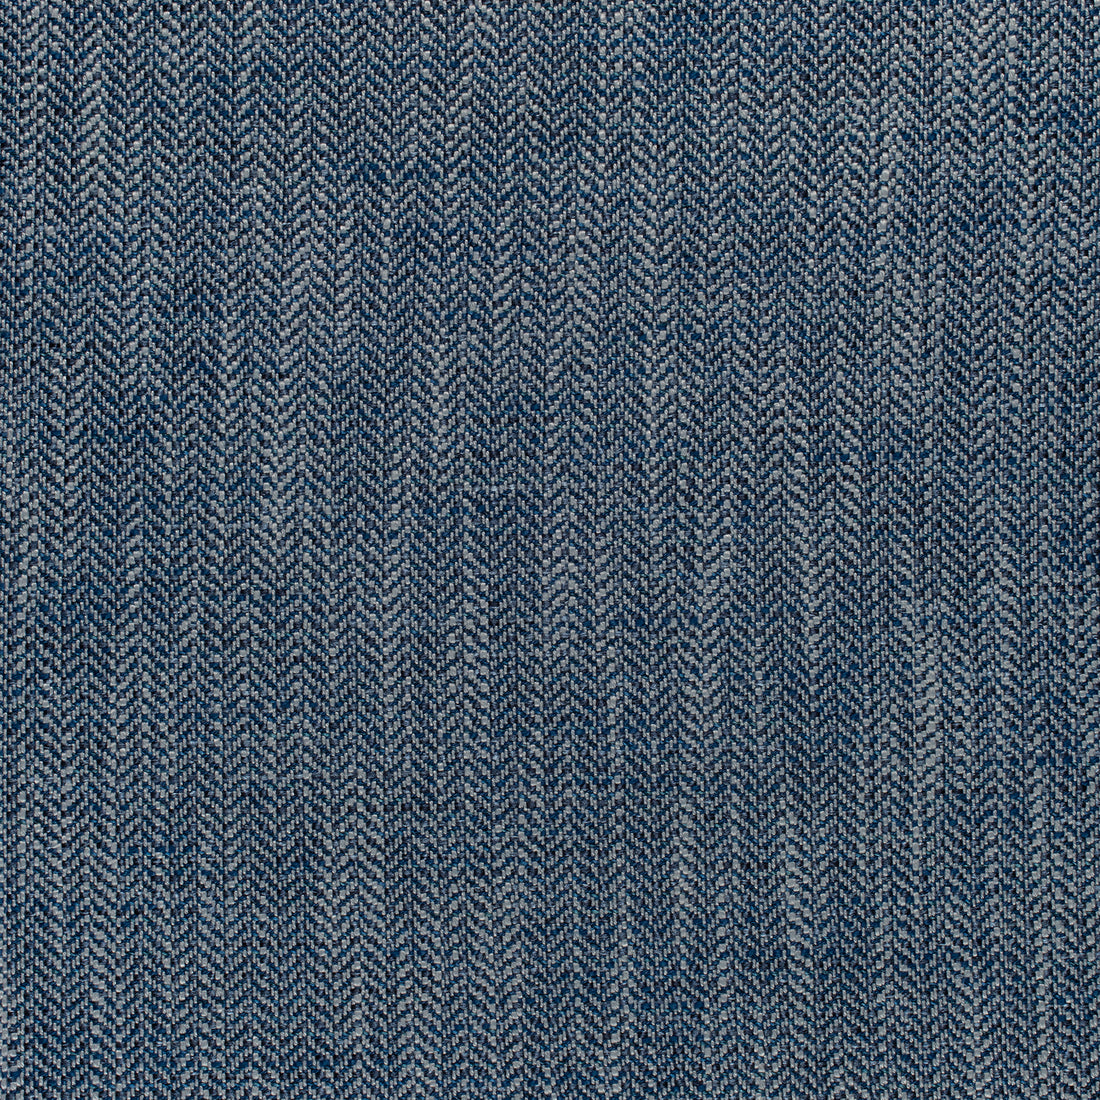 Ashbourne Tweed fabric in denim color - pattern number W80614 - by Thibaut in the Pinnacle collection